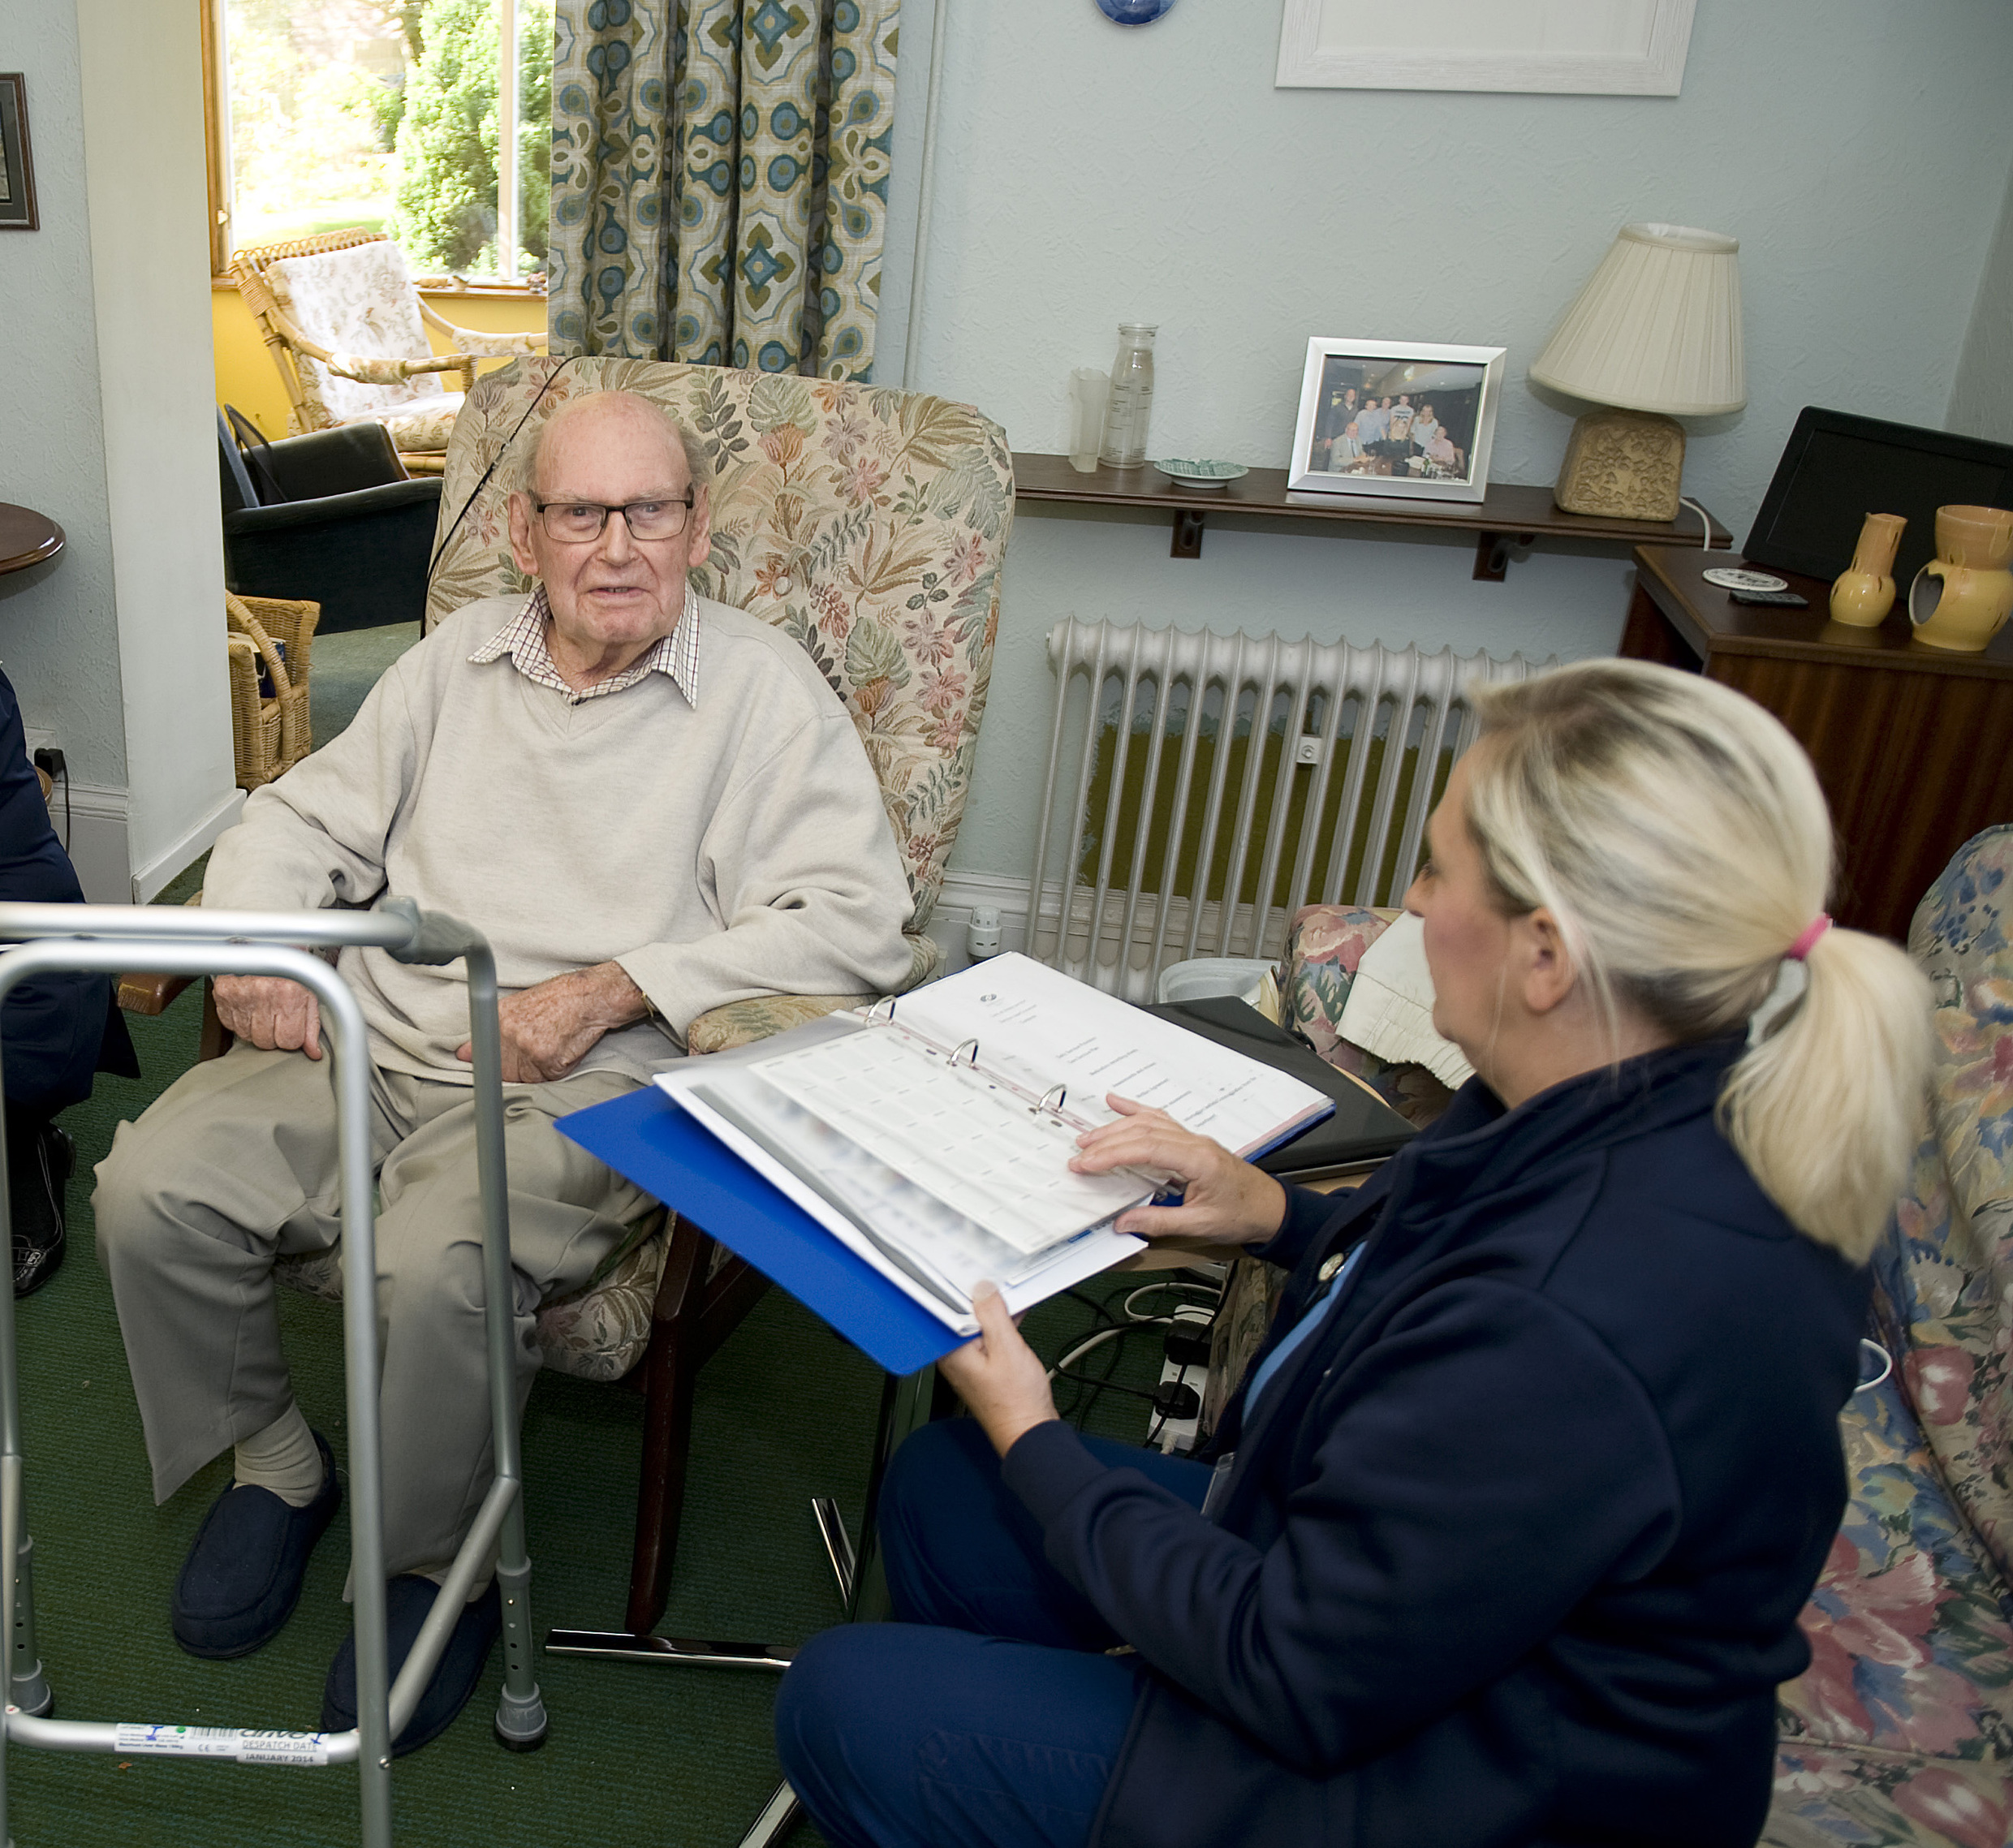  An elderly man sitting in his room with a healthcare worker looking at his notes in a folder